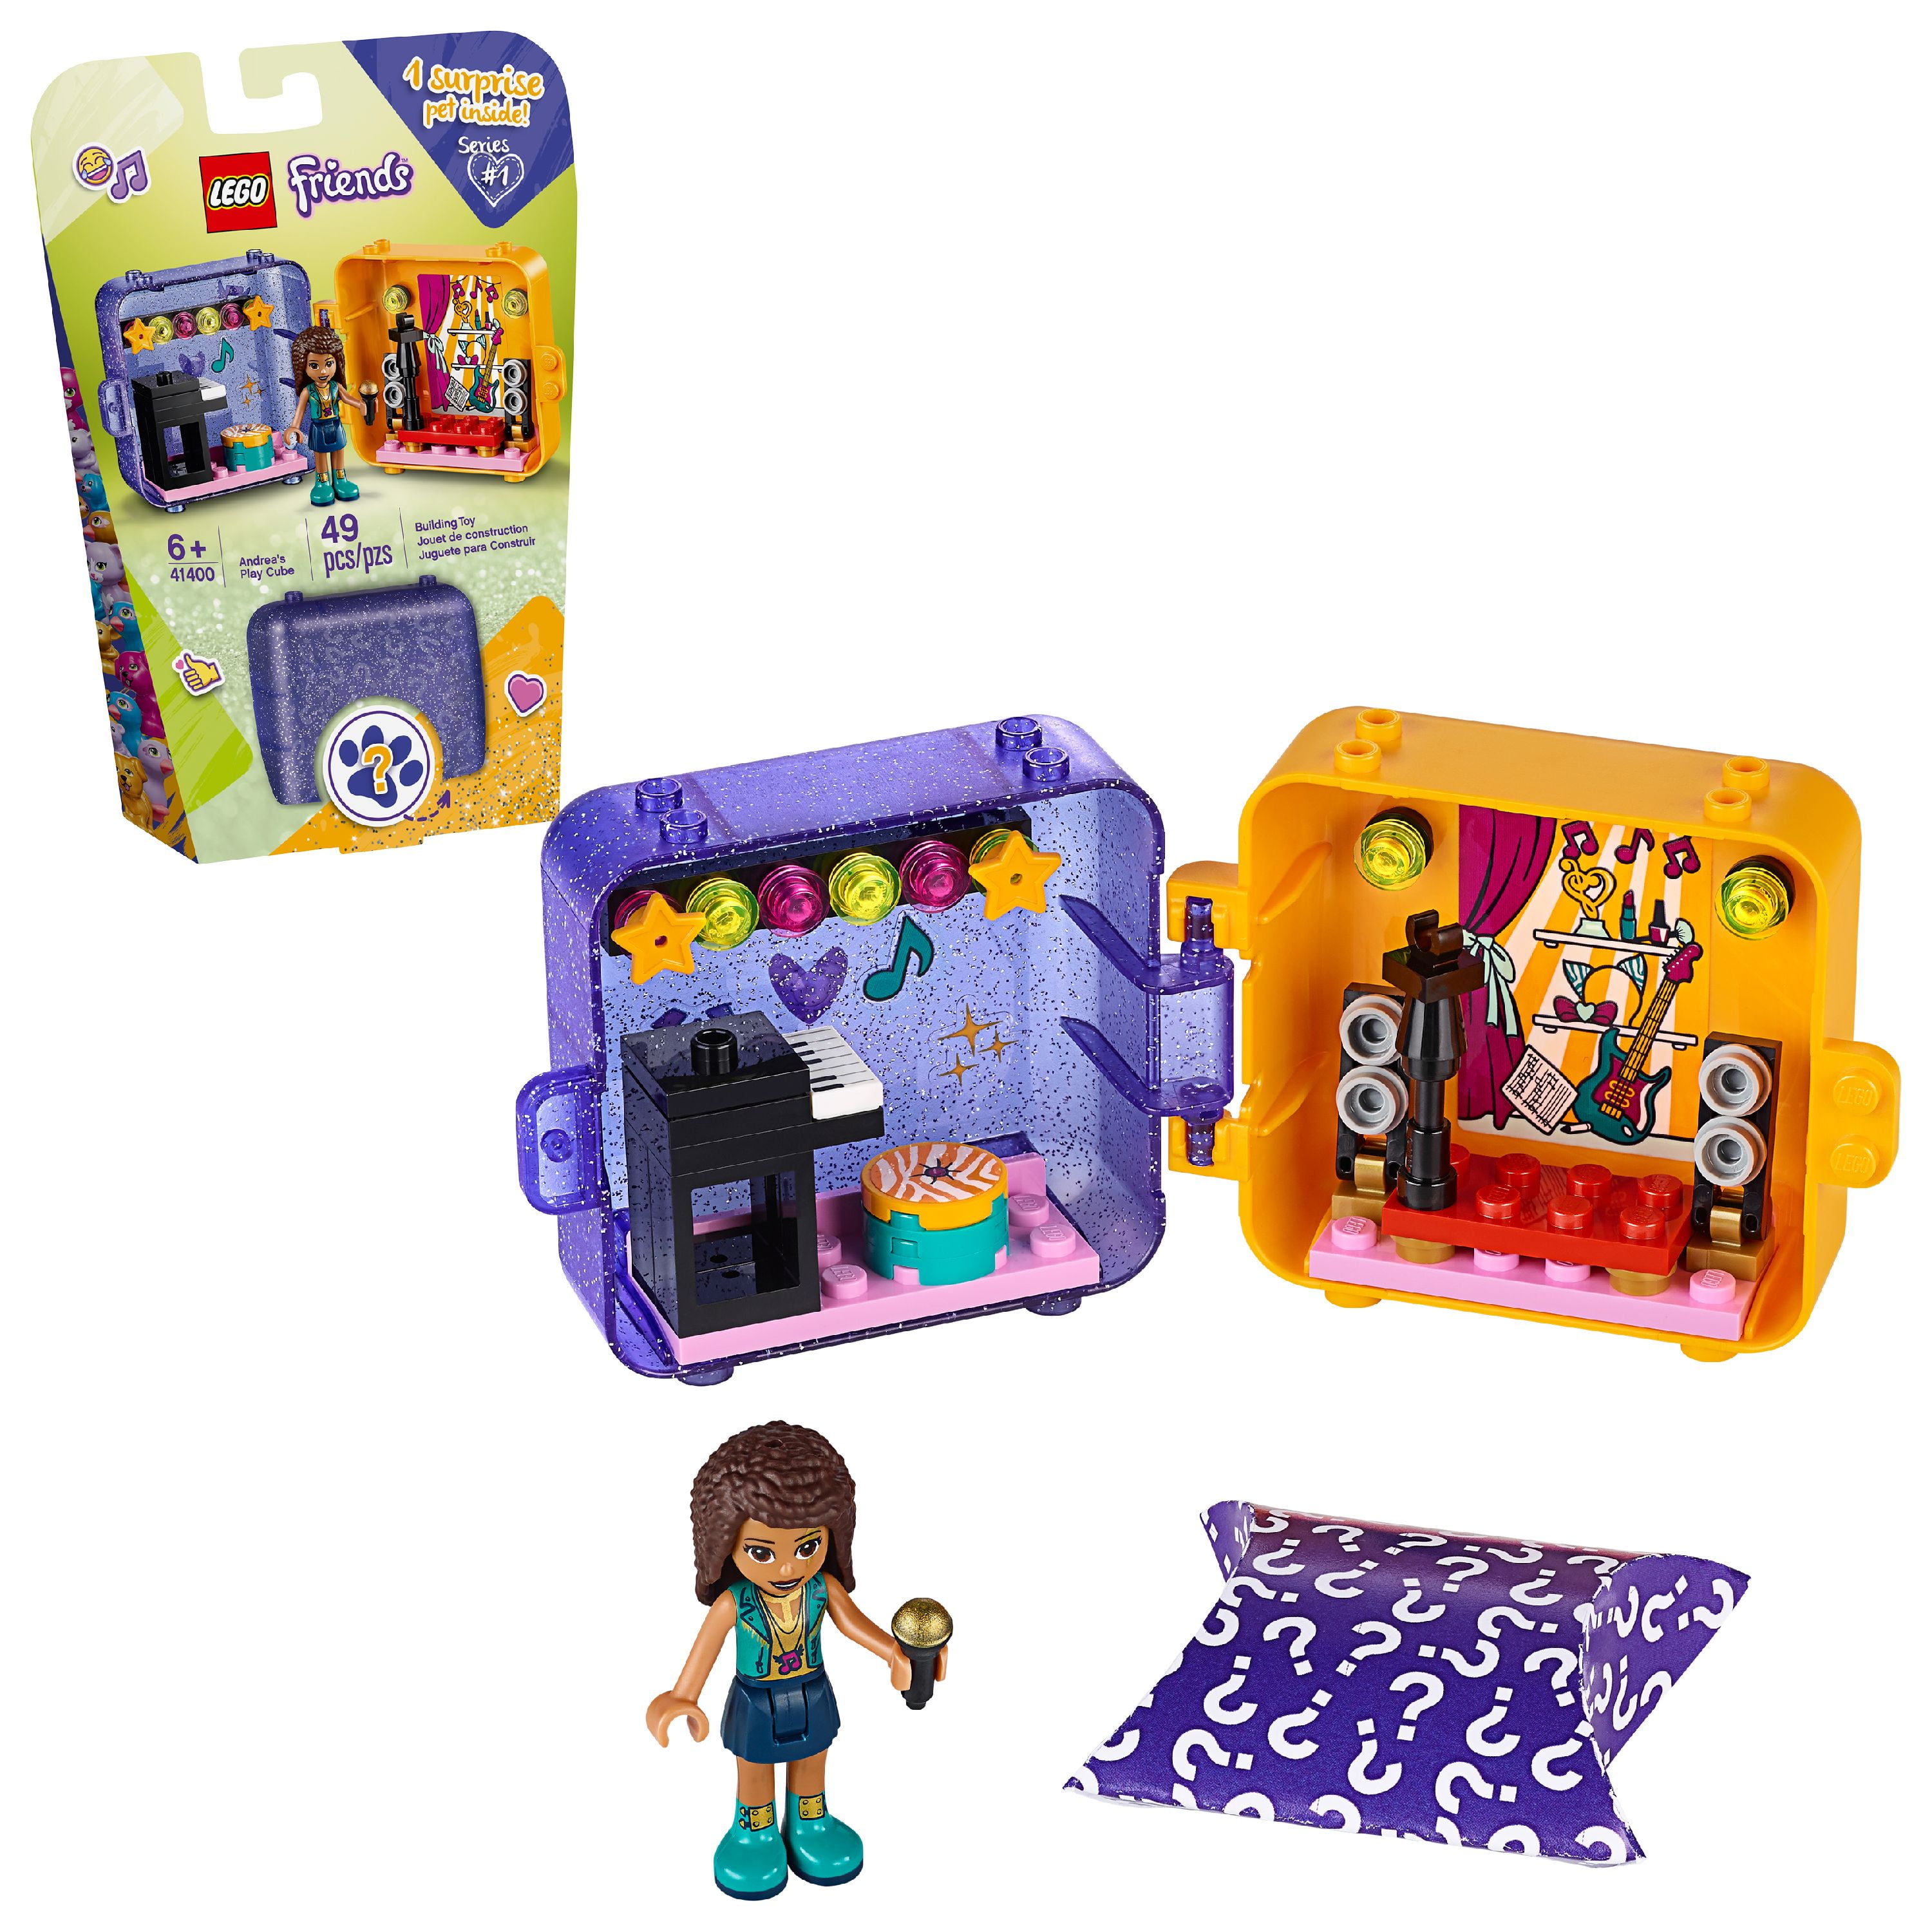 gård volatilitet orientering LEGO Friends Andrea's Play Cube 41400 Building Kit, Includes a Pop Star  Mini-Doll and Toy Pet (49 Pieces) - Walmart.com